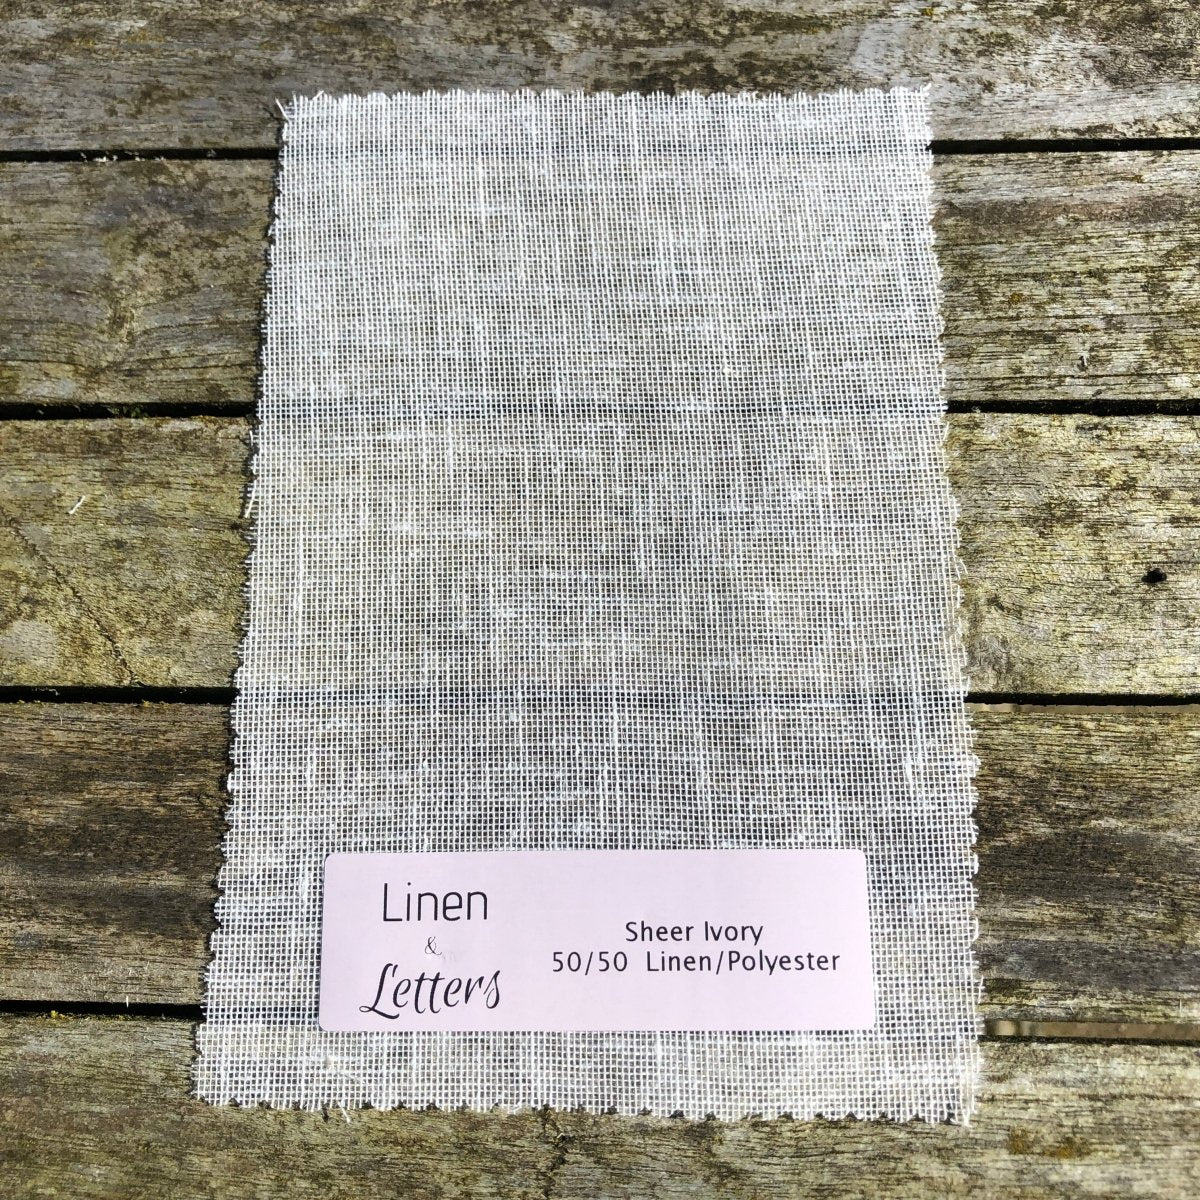 Fabric Samples - Linen and Letters